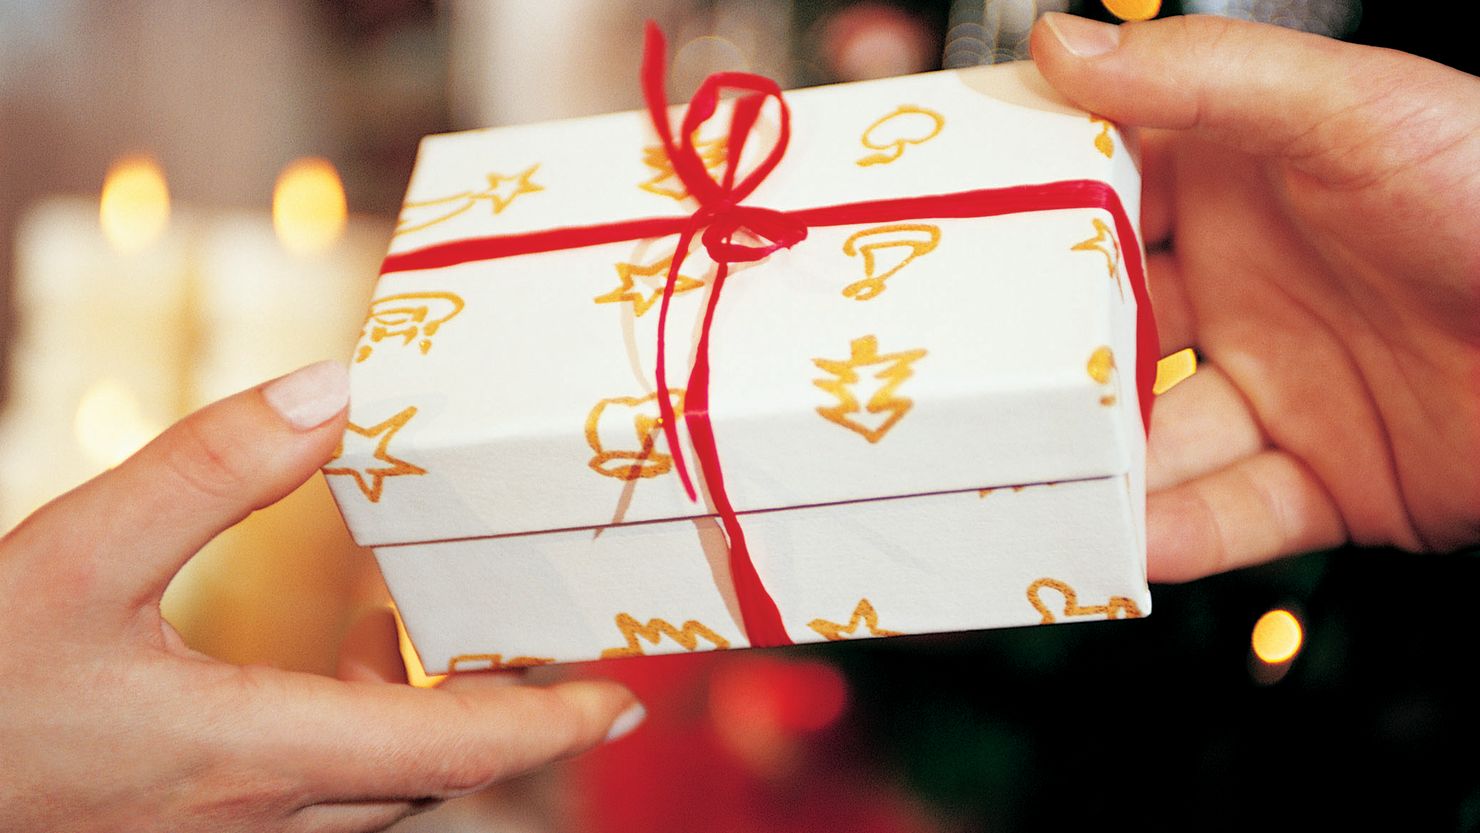 There has been some research to suggest that men and women view gifts differently. 